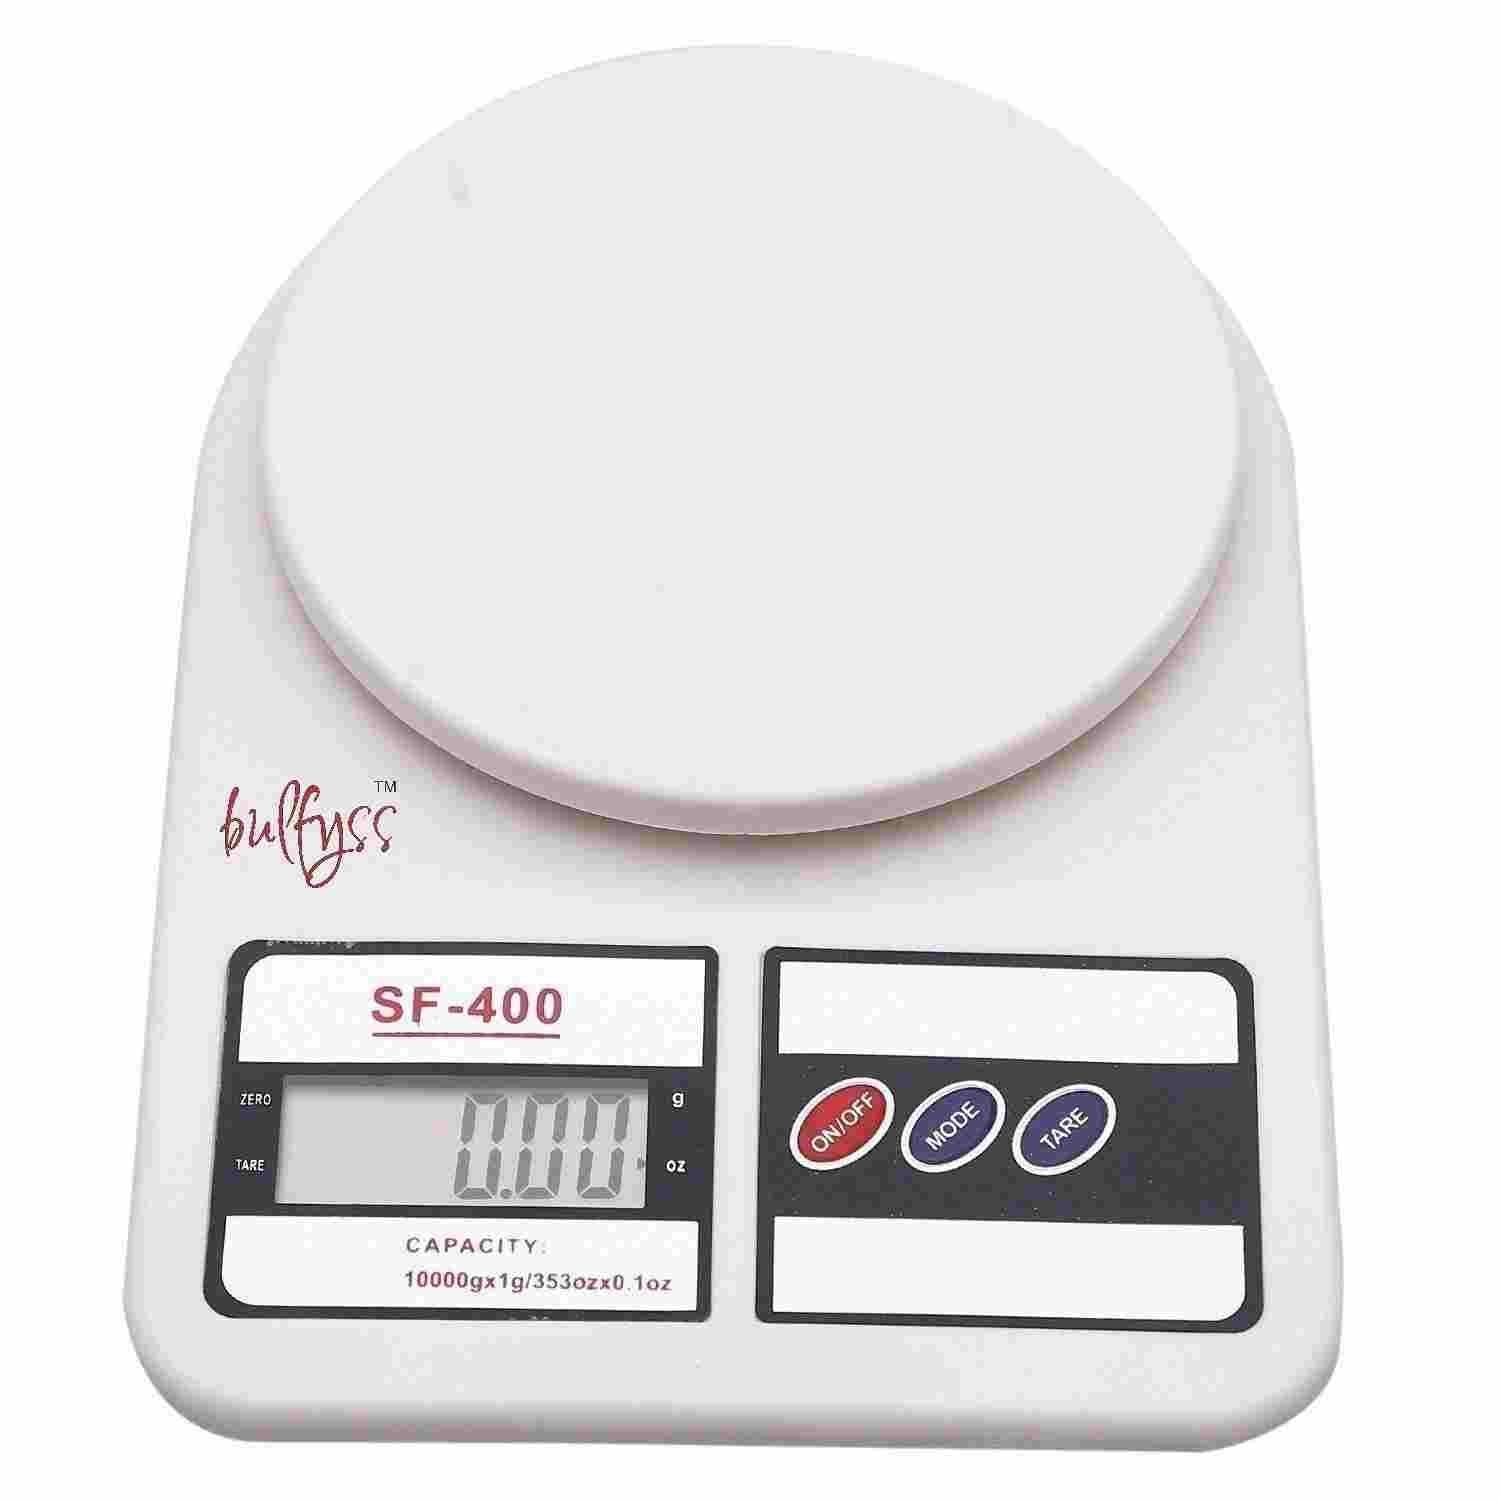 Bulfyss Weighing Scale Review- Should You Buy It? - All About Best ...